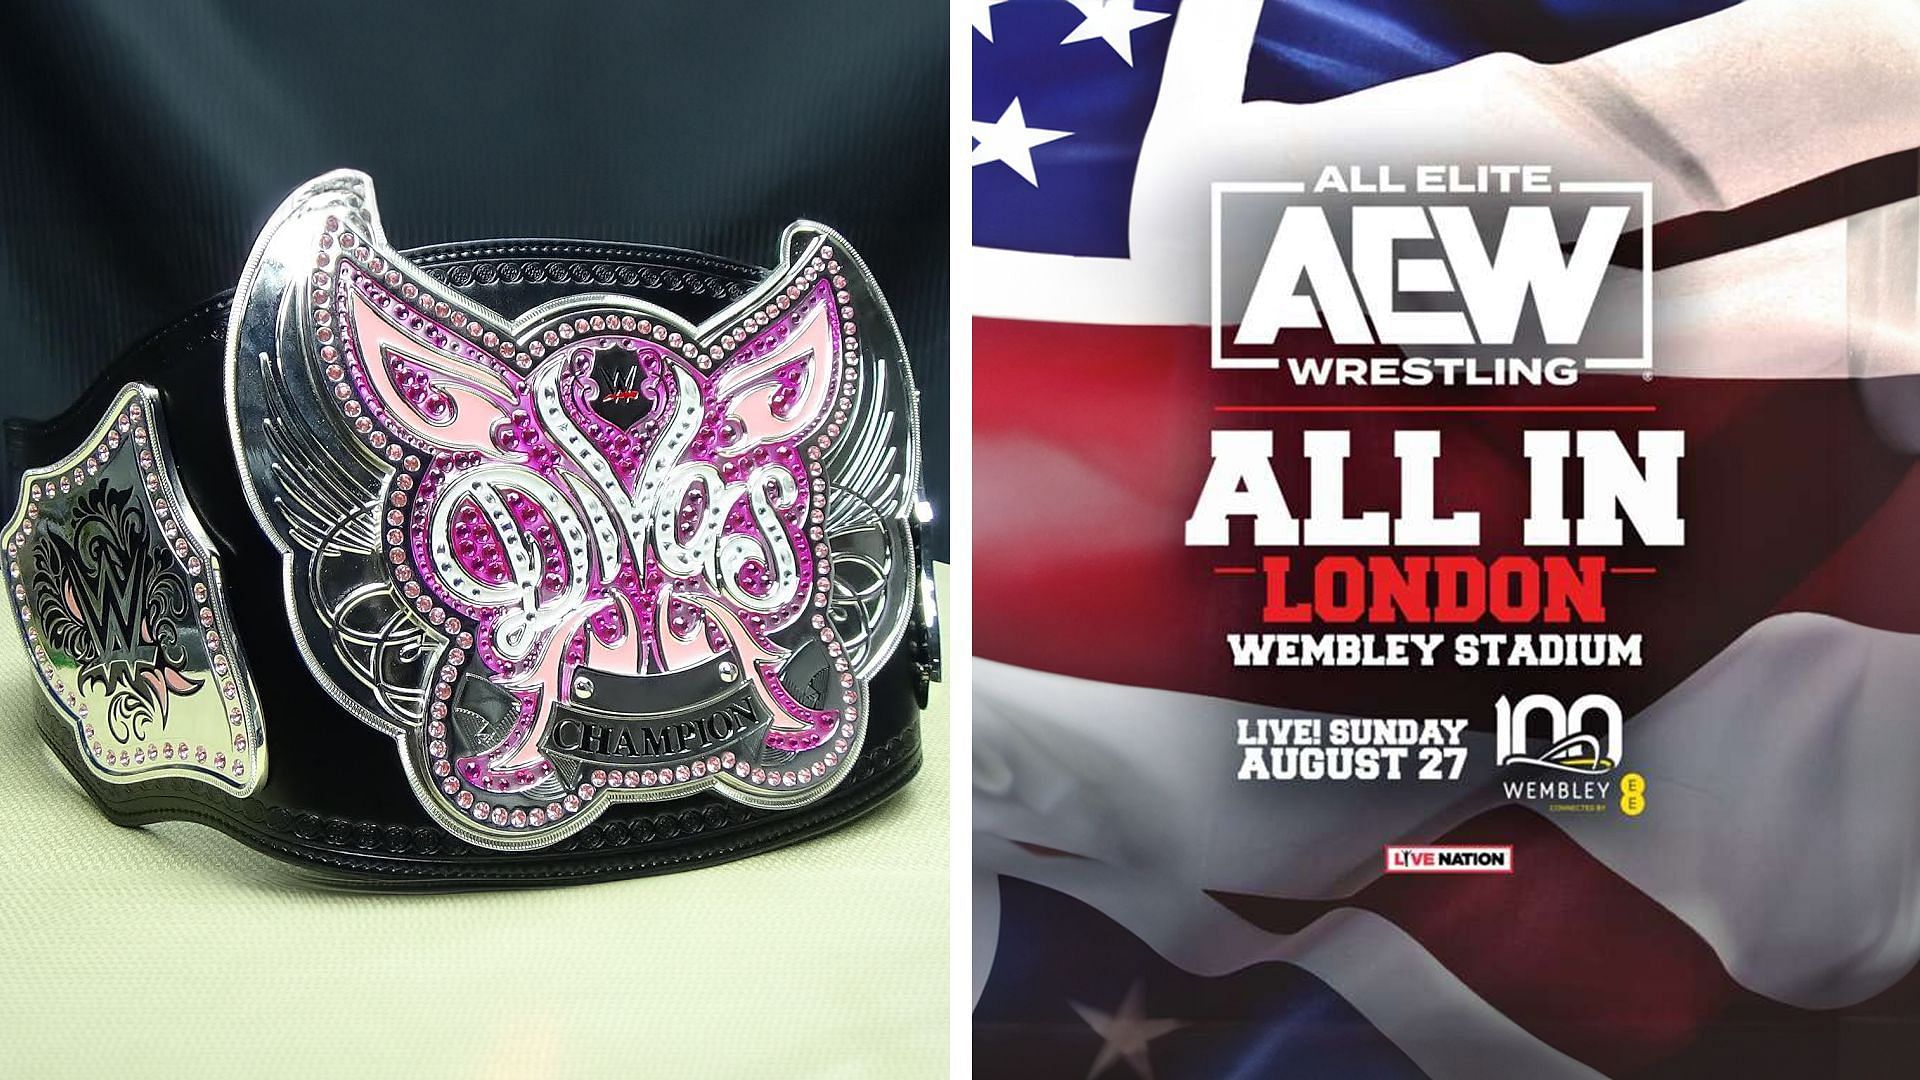 Where will a former WWE Superstar feature on the card at AEW All In?